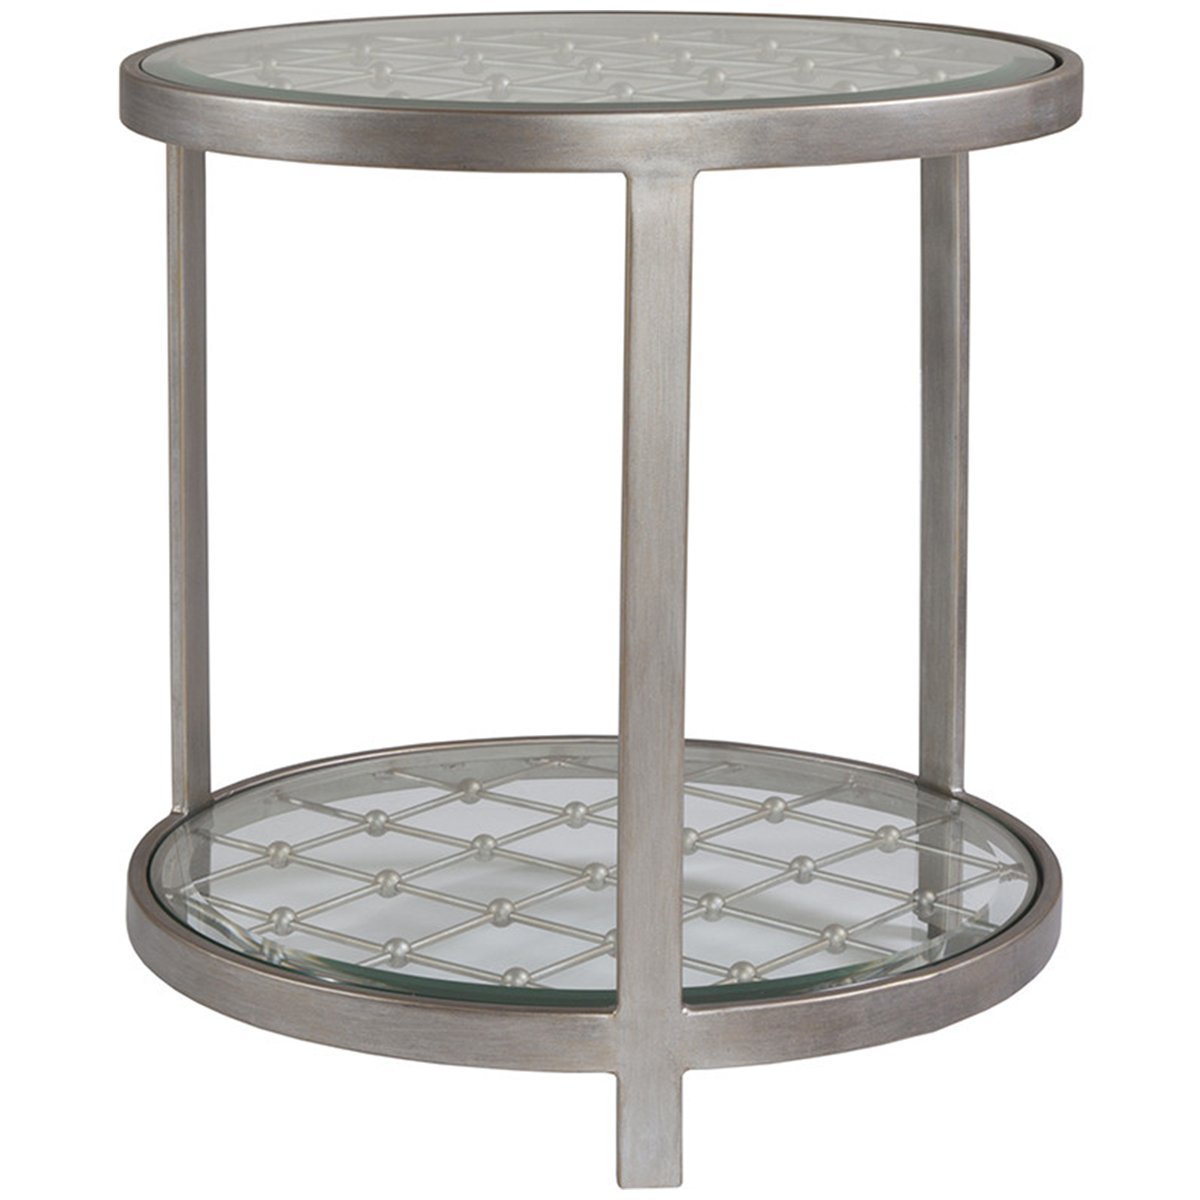 Artistica Home Royere Round End Table 01-2009-953